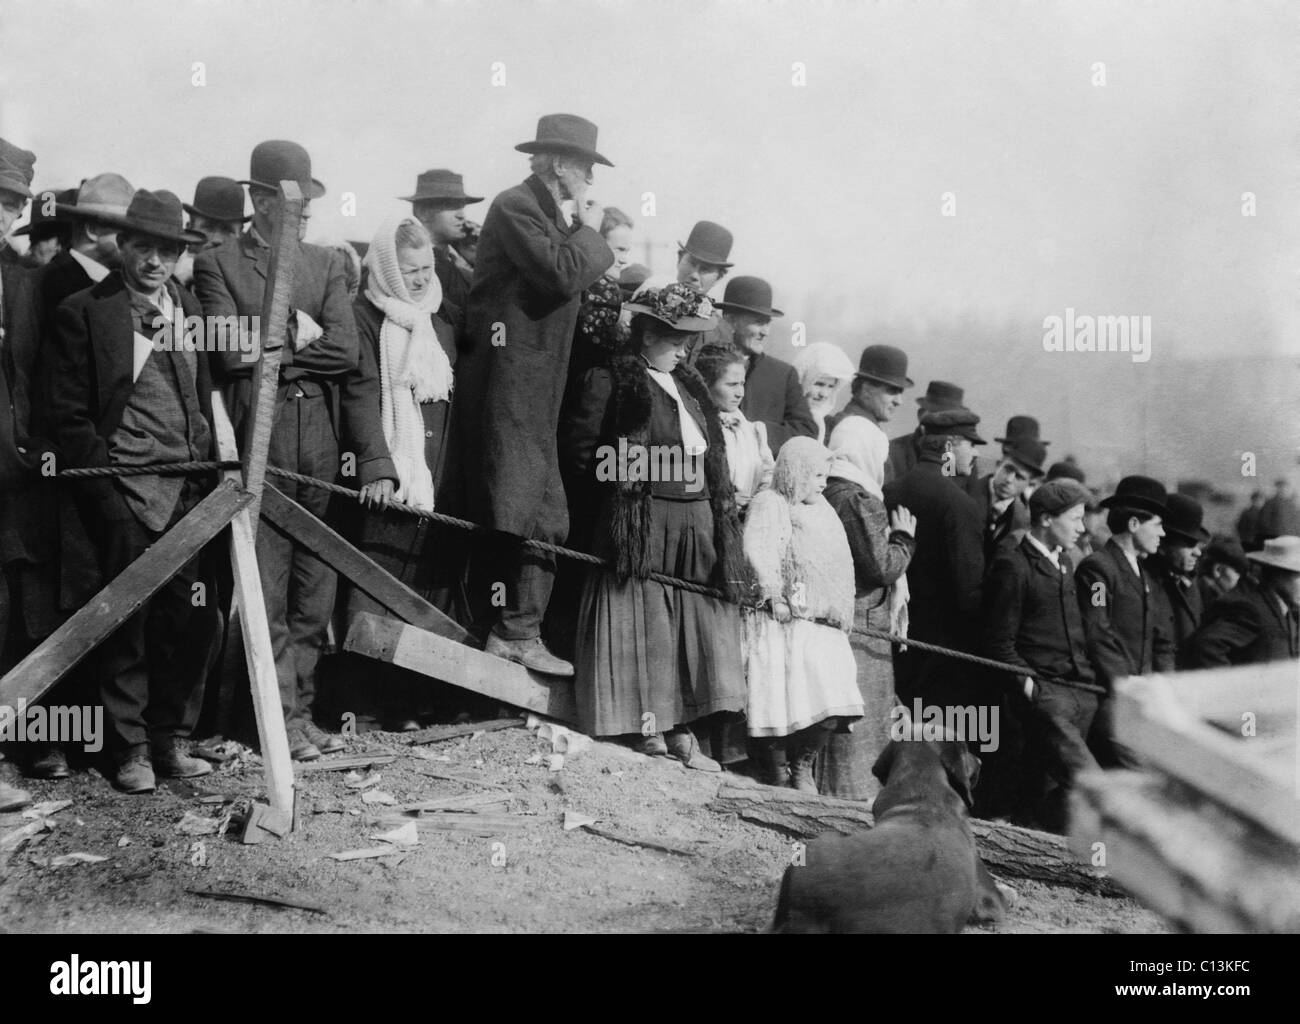 Families and friends waiting at the mouth of the Marianna Coal Mine after the explosion of November 30, 1908. 154 miners were killed in one the deadliest mining accidents of the 20th century. Stock Photo